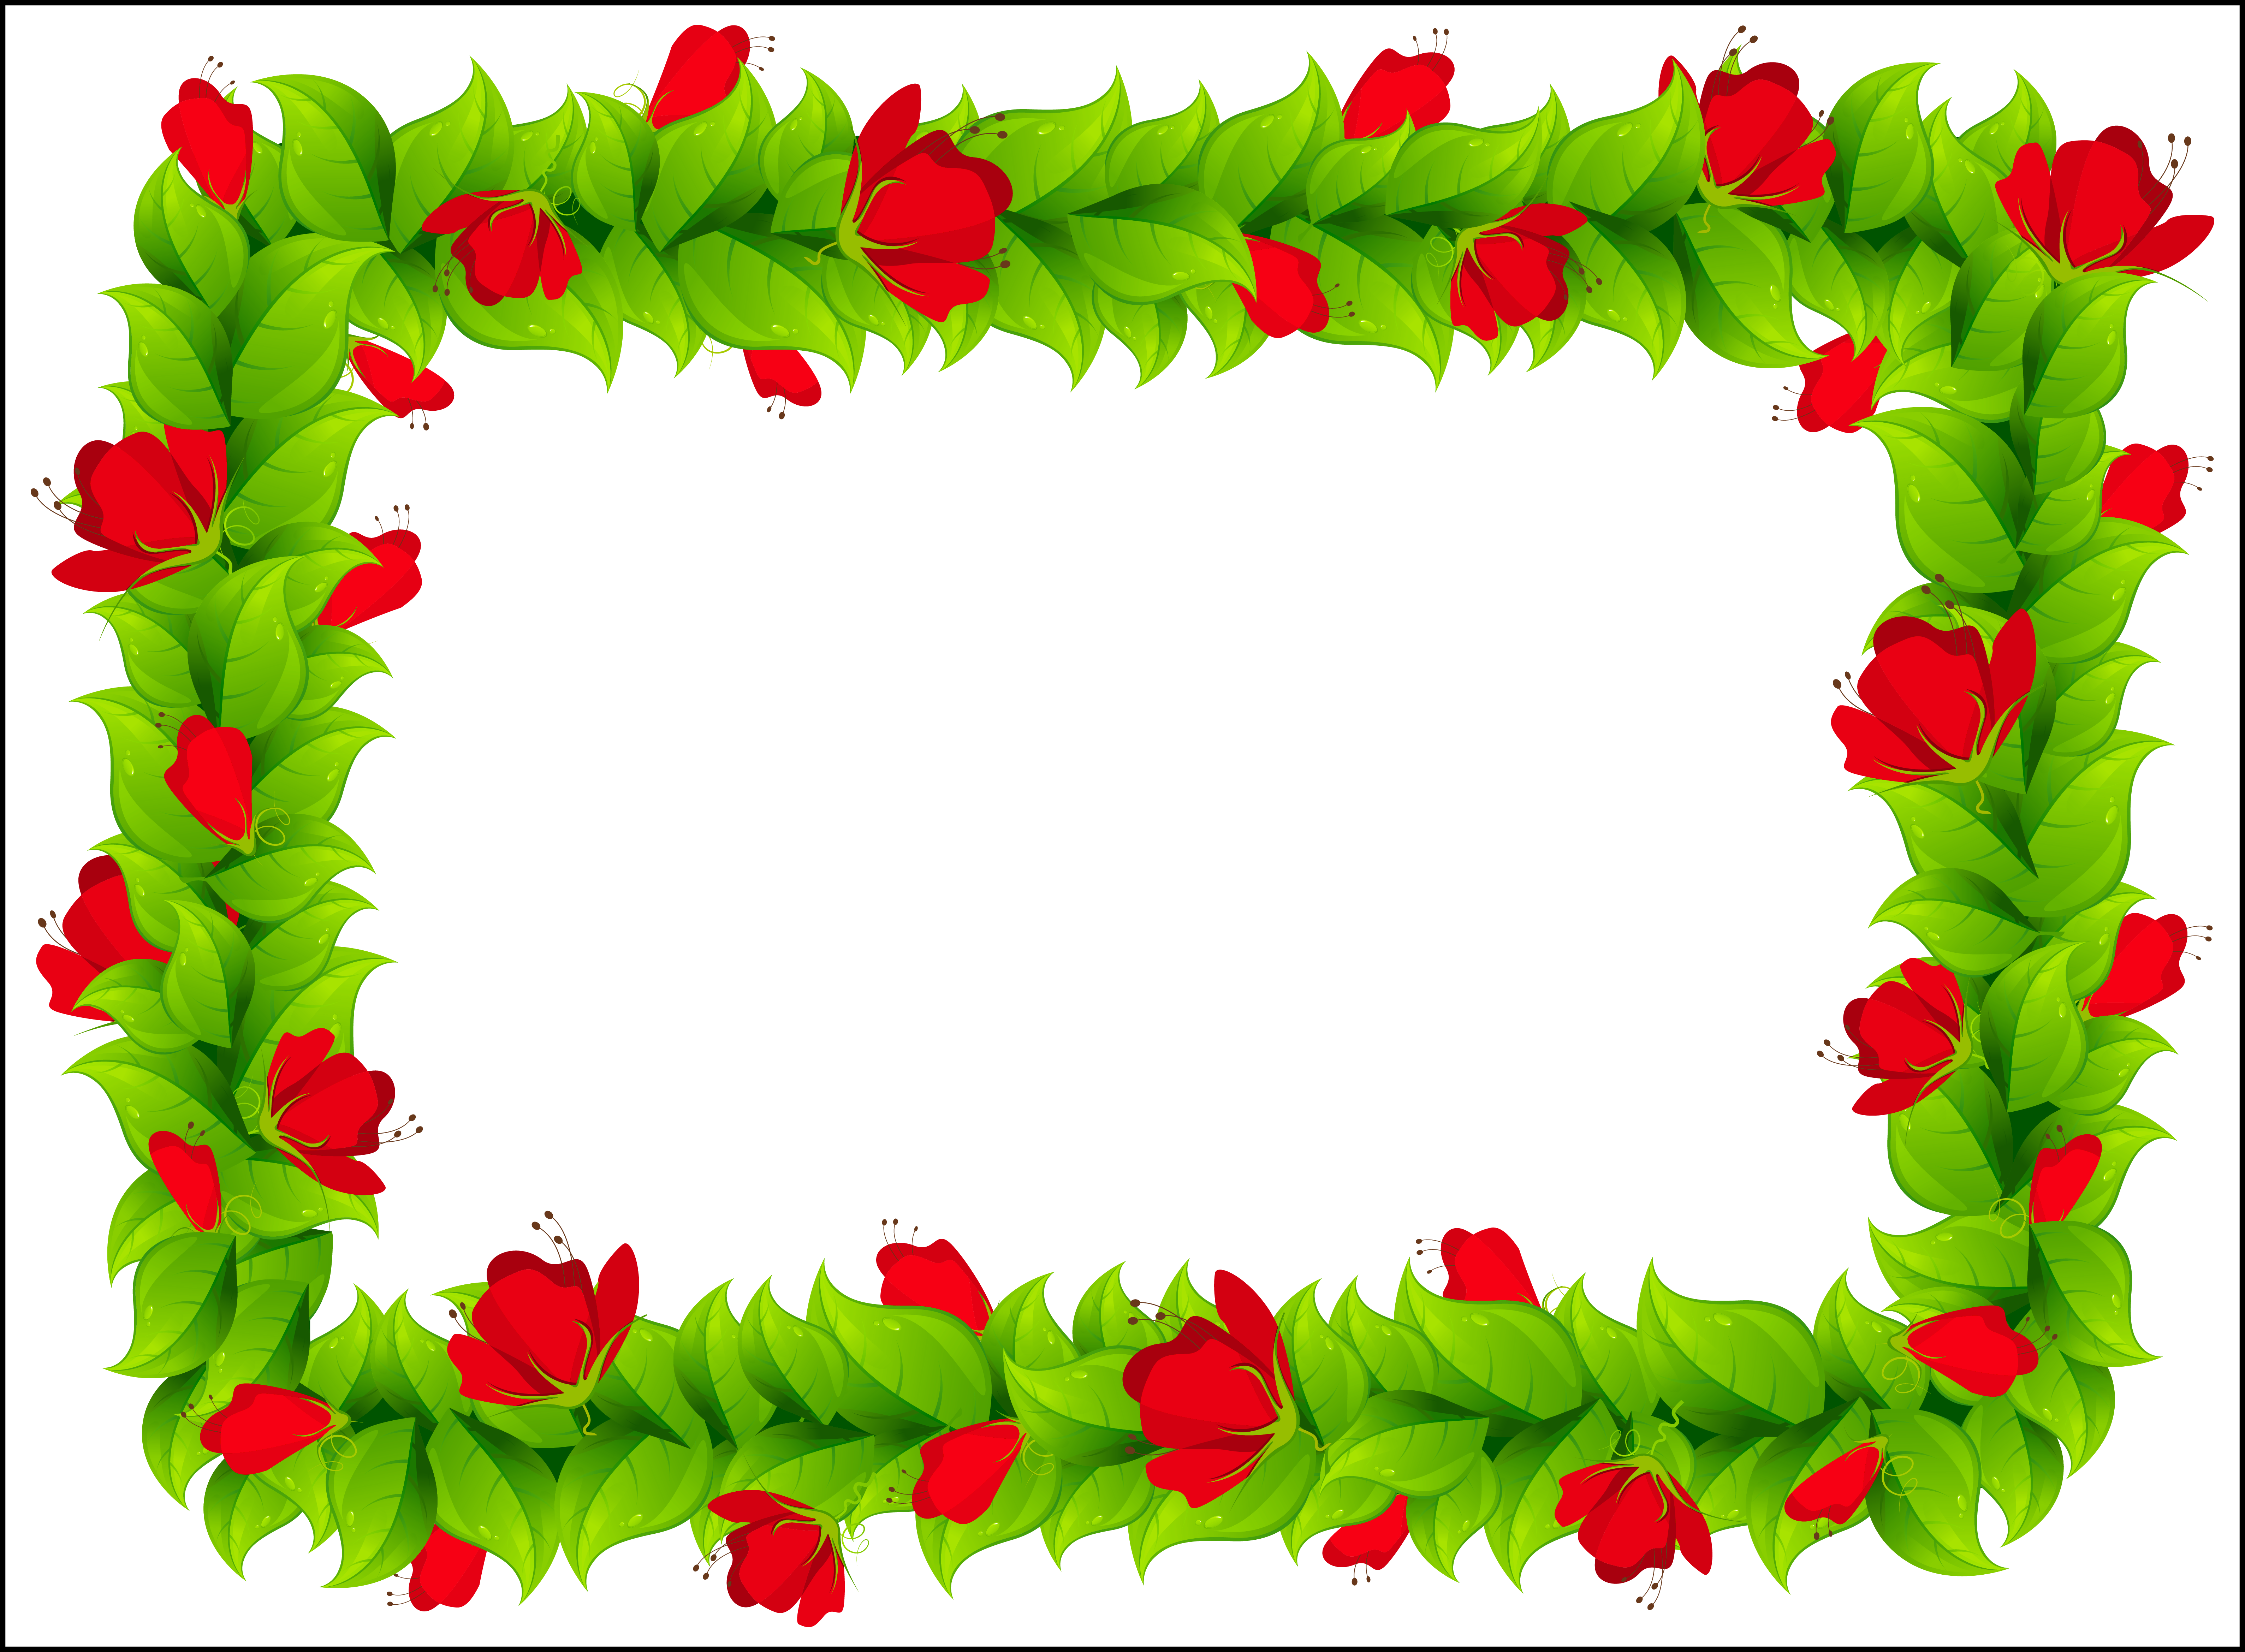 Awesome Floral Border Frame Clipart Png Image B U Flowery - Awesome Floral Border Frame Clipart Png Image B U Flowery (6357x4678)